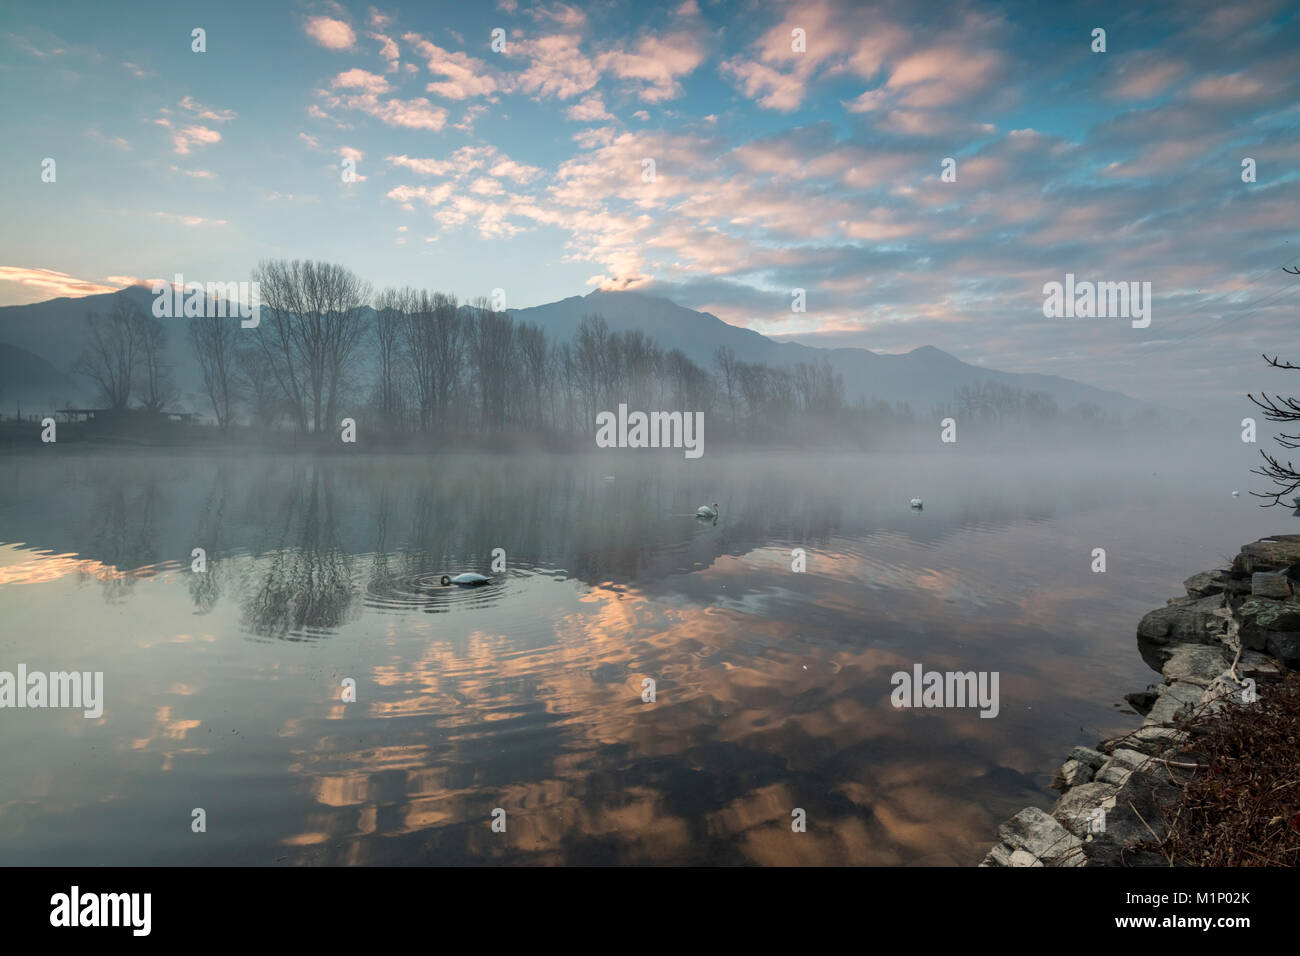 Swans in River Mera at sunrise, Sorico, Como province, Lower Valtellina, Lombardy, Italy, Europe Stock Photo